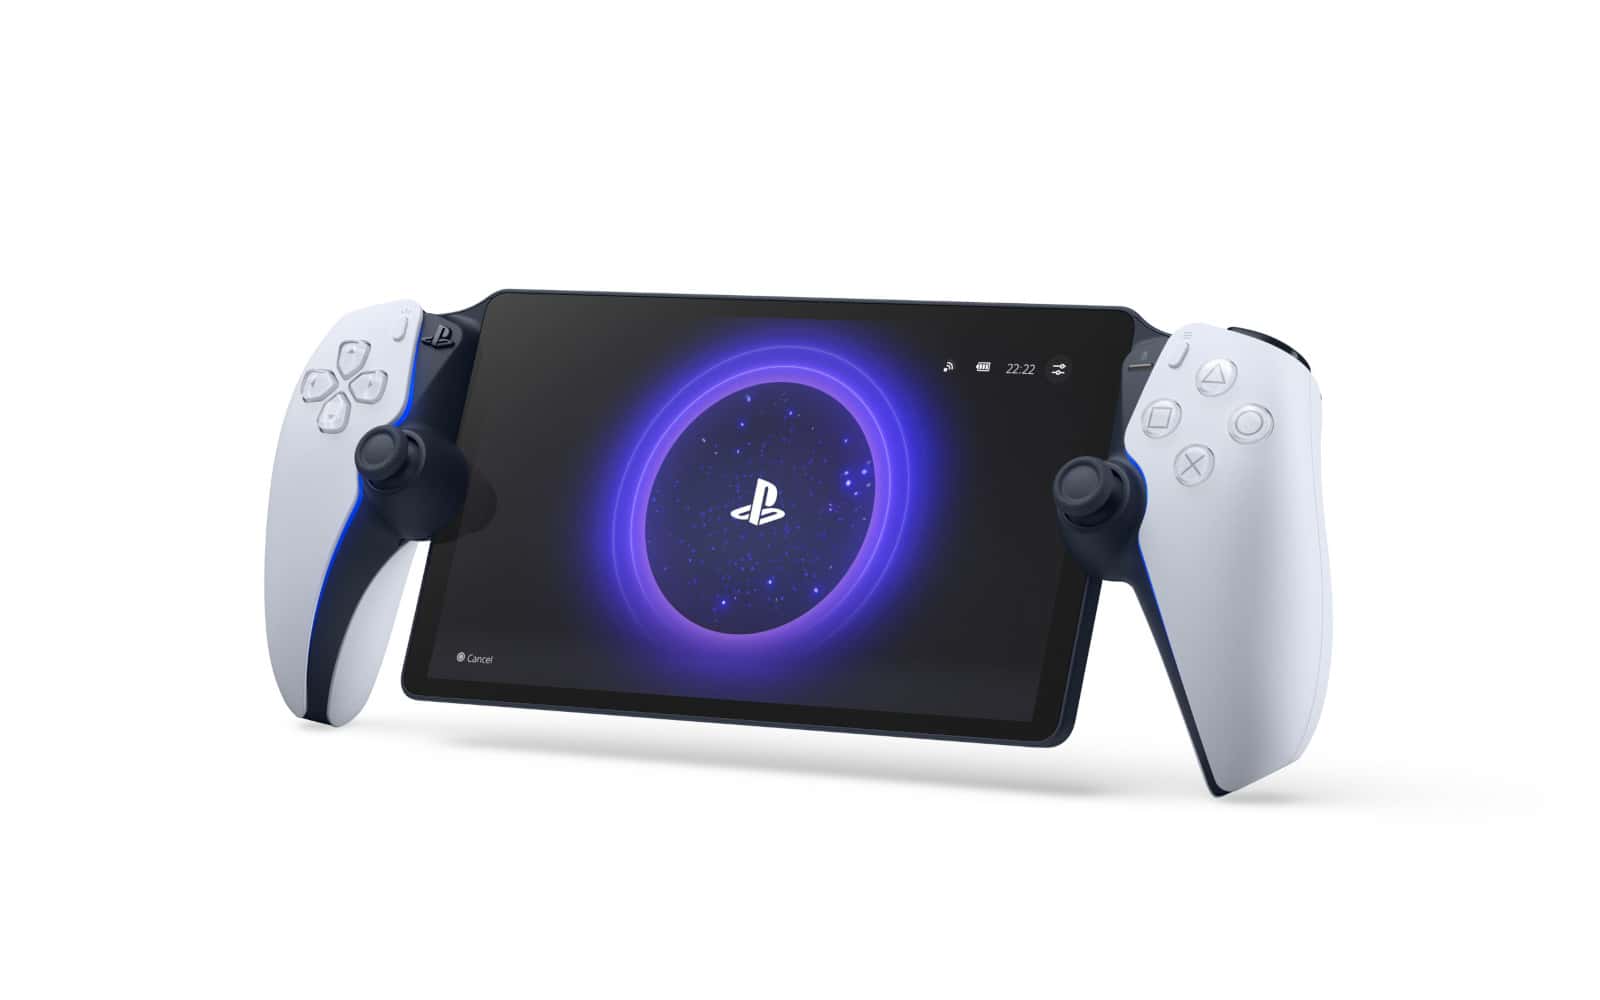 A PlayStation handheld that plays PS4 games could become a reality